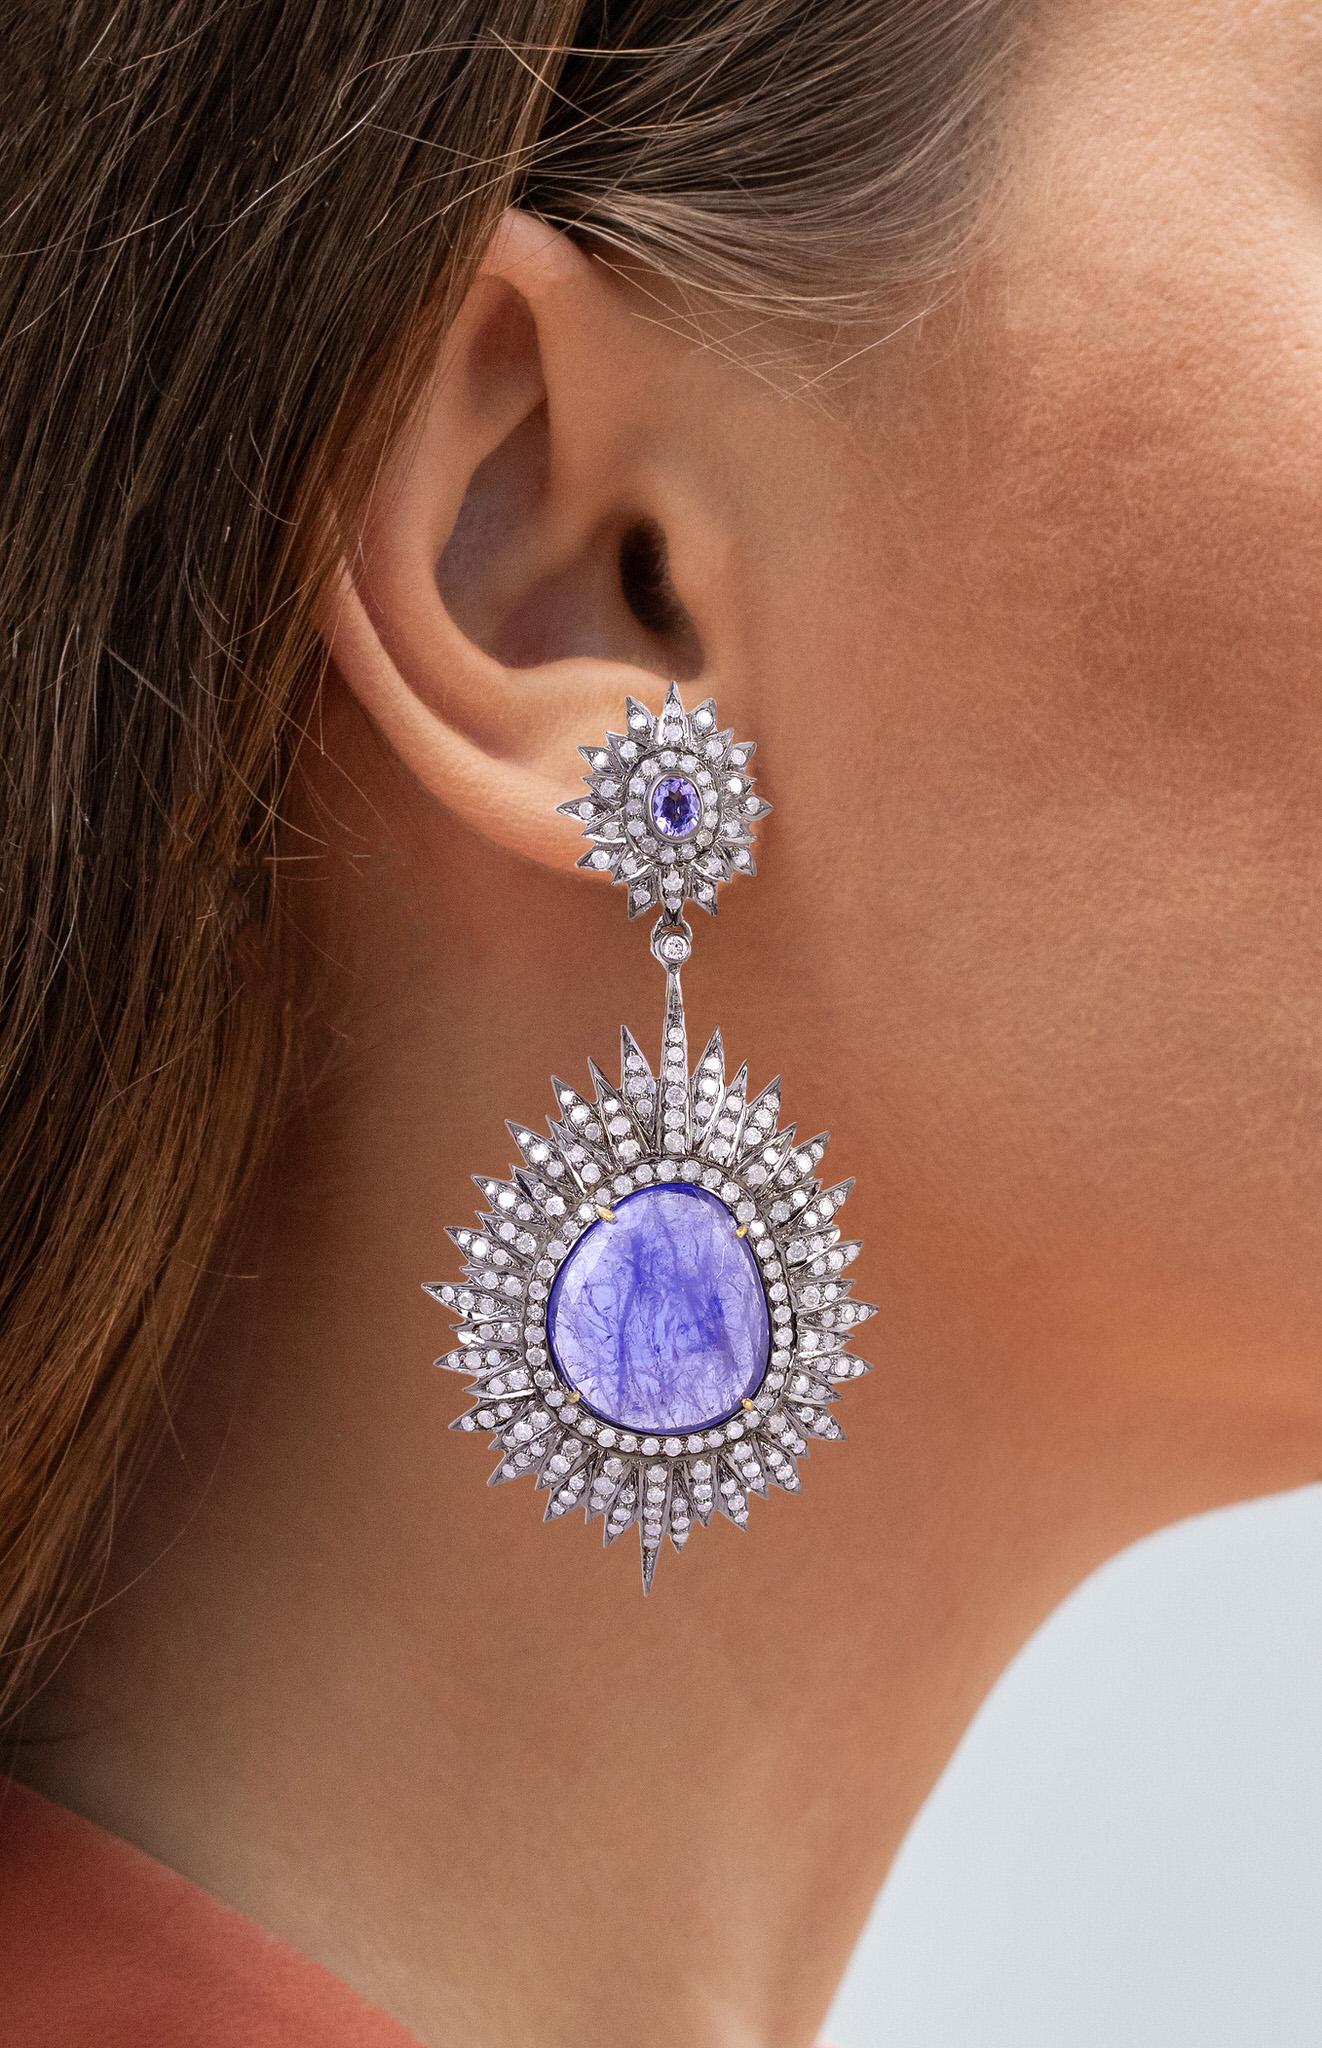 It comes with the appraisal by GIA GG/AJP
All Gemstones are Natural
Tanzanites = 21.25 Carats
Diamonds = 6.15 Carats
Cut: Mixed Cut
Earrings Dimensions: 75 x 38 mm
Metal: 18K Gold & Silver